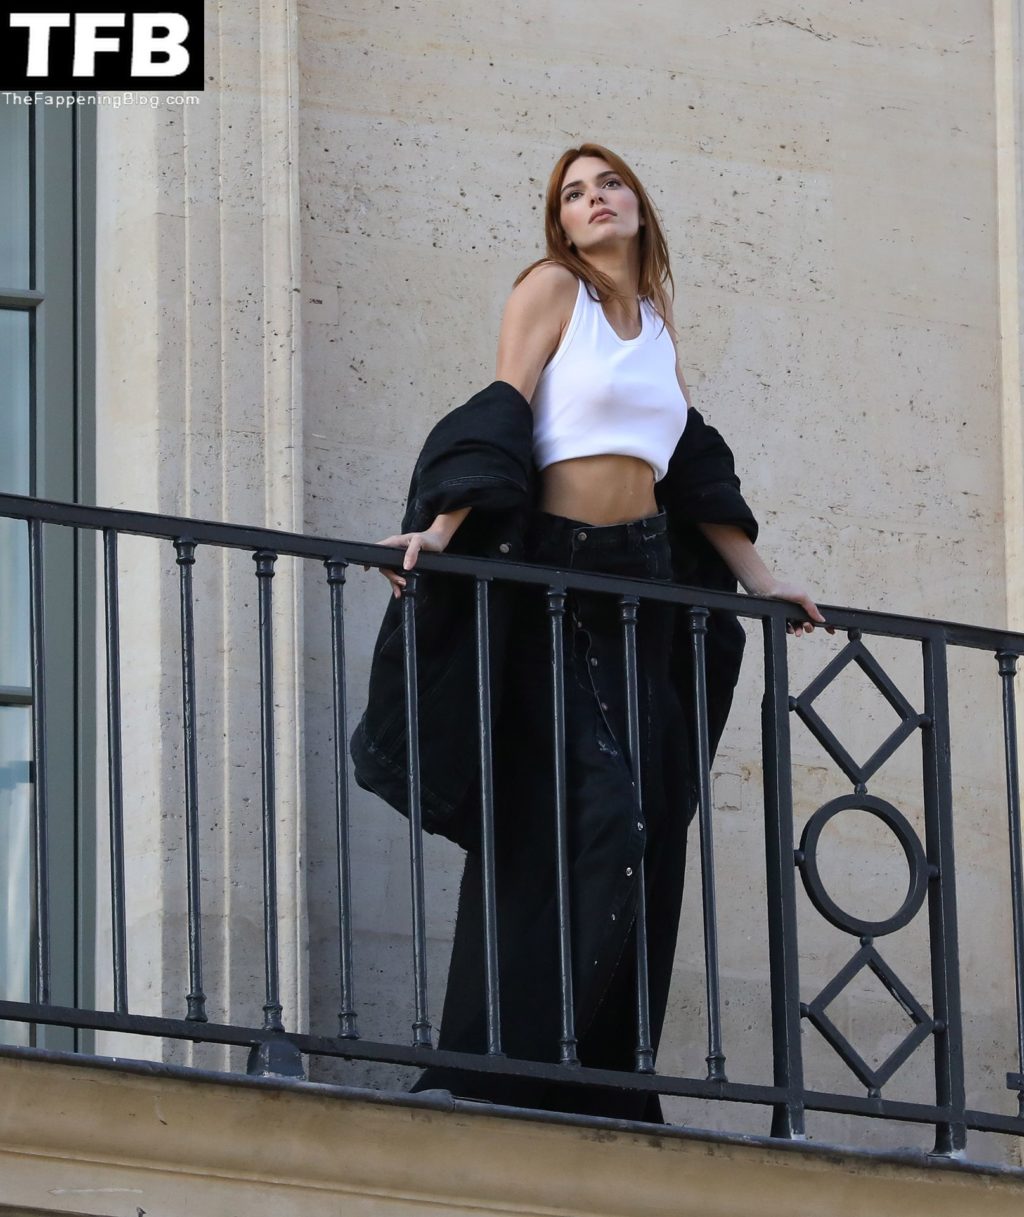 Kendall Jenner Braless The Fappening Blog 73 1024x1217 - Braless Kendall Jenner Poses in Paris (141 Photos)